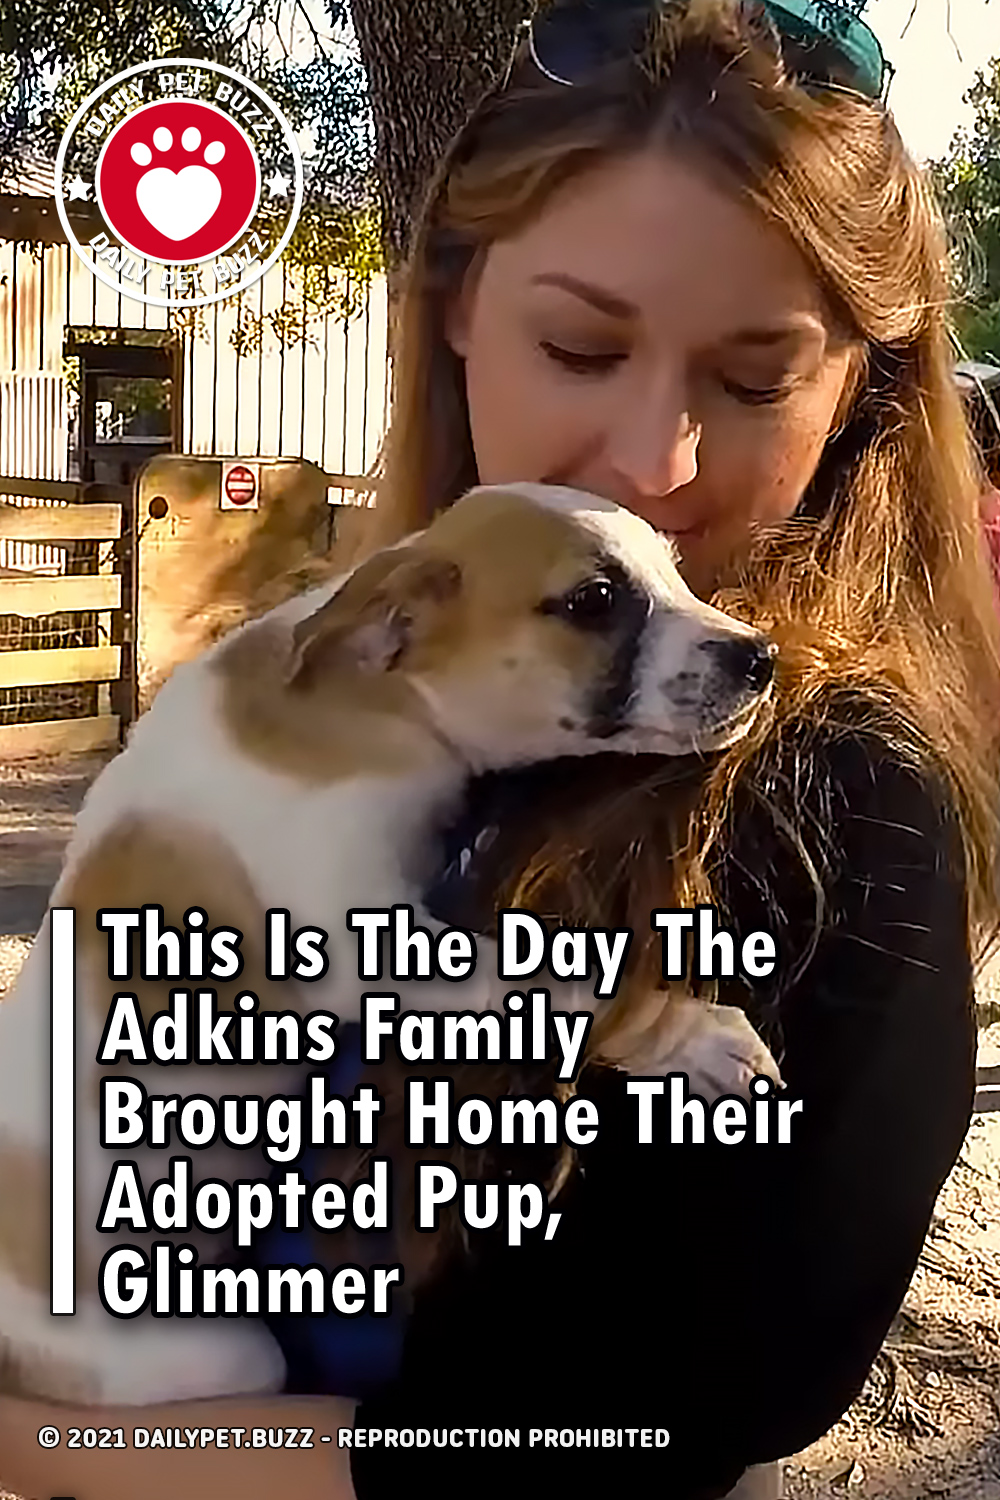 This Is The Day The Adkins Family Brought Home Their Adopted Pup, Glimmer